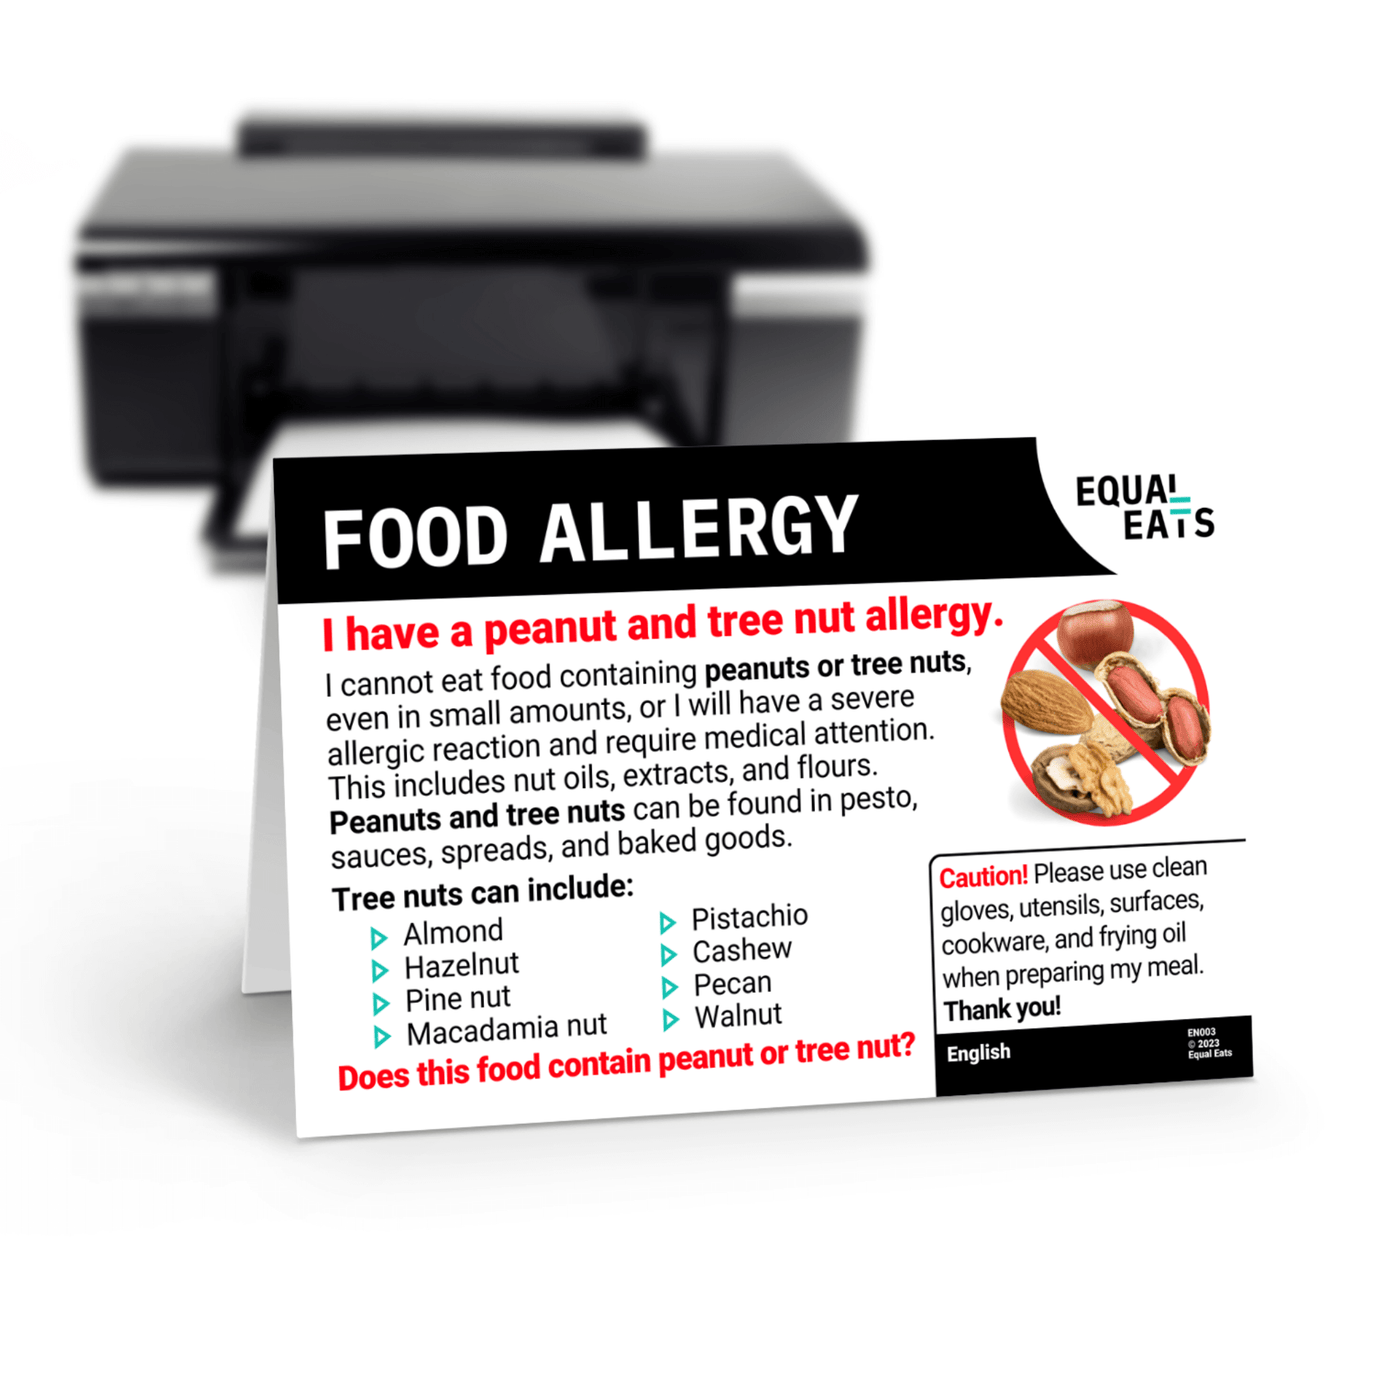 Spanish Printable Allergy Card for Tree Nut Allergies